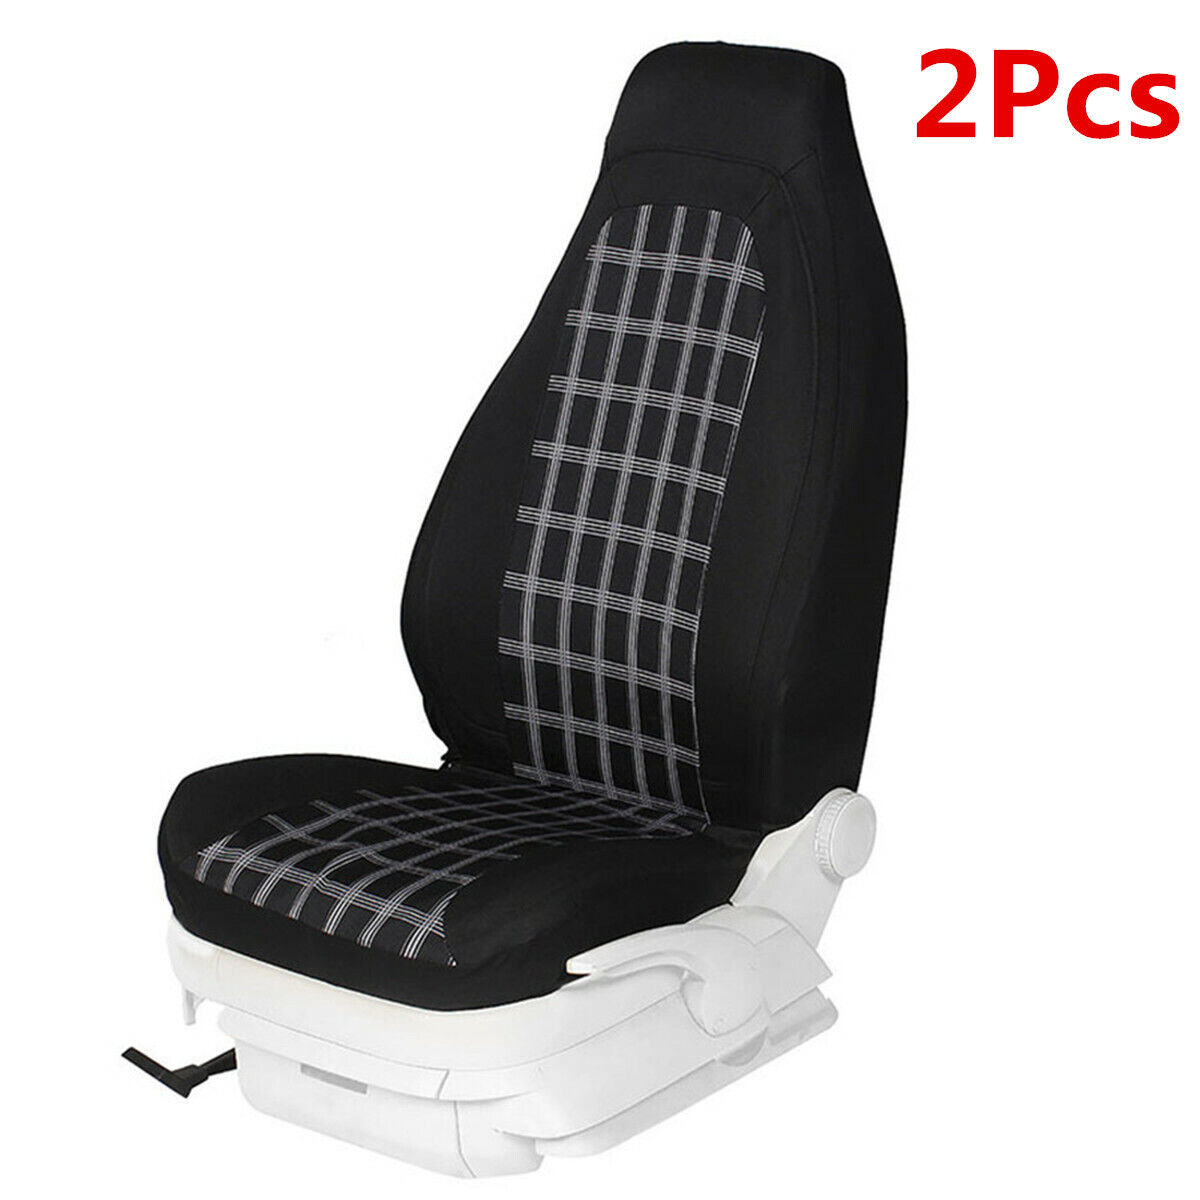 2Pcs Black Lattice Car Front Seat High Bucket Protector Cover Breathable Cotton